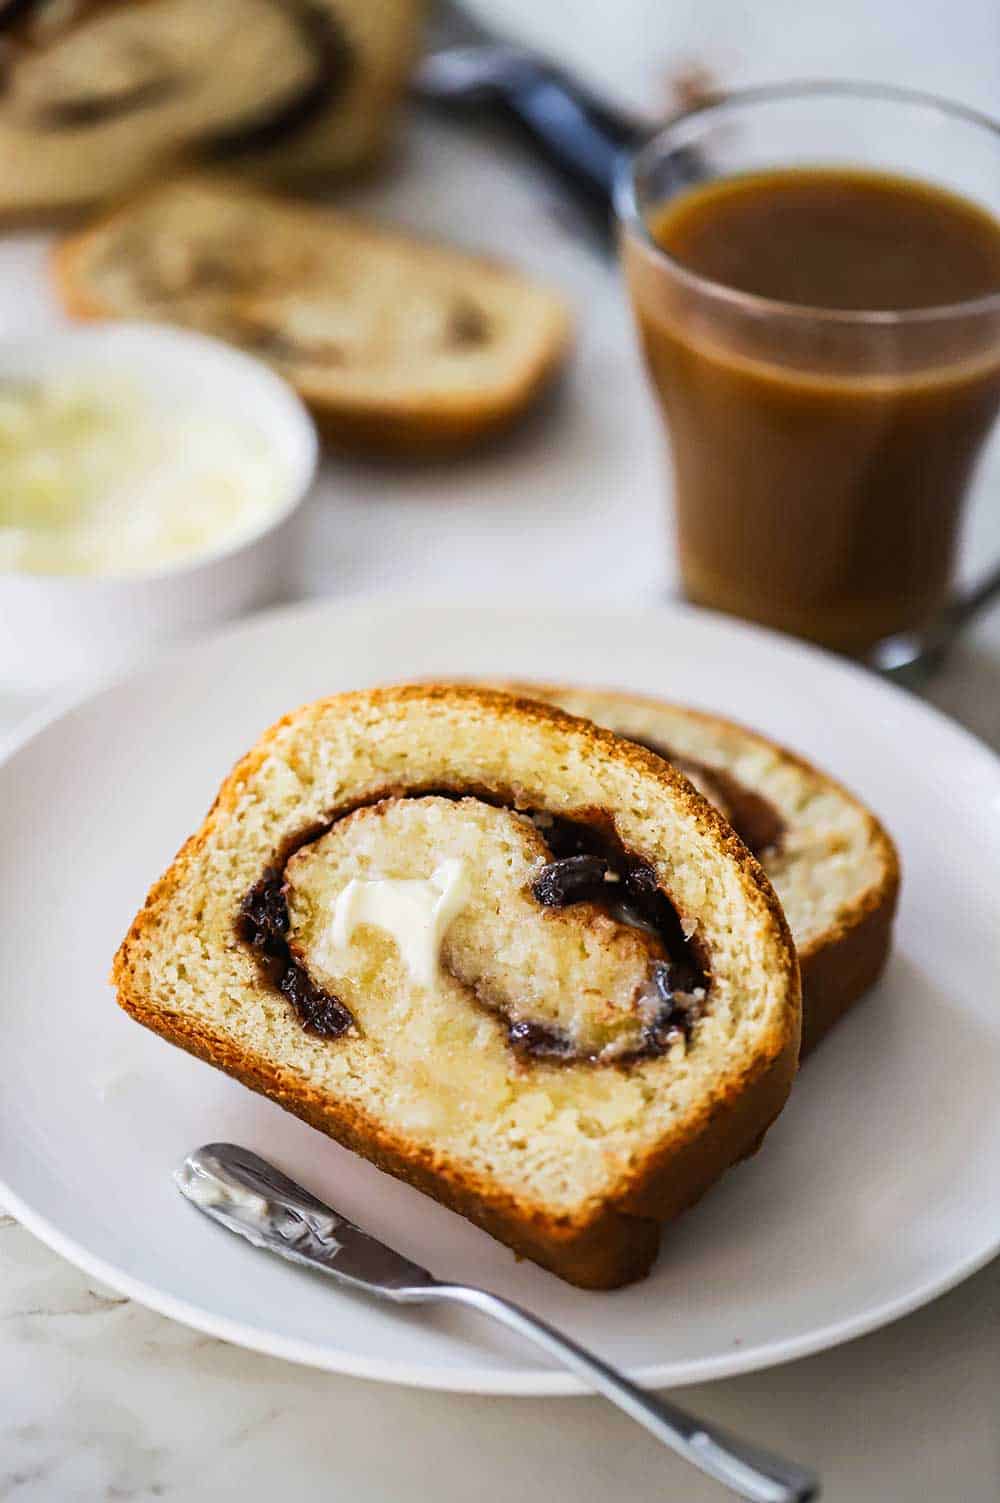 Two slices of cinnamon raisin bread stacked on top of each other with melted butter on one of the slices all on a plate next to a mug of coffee.